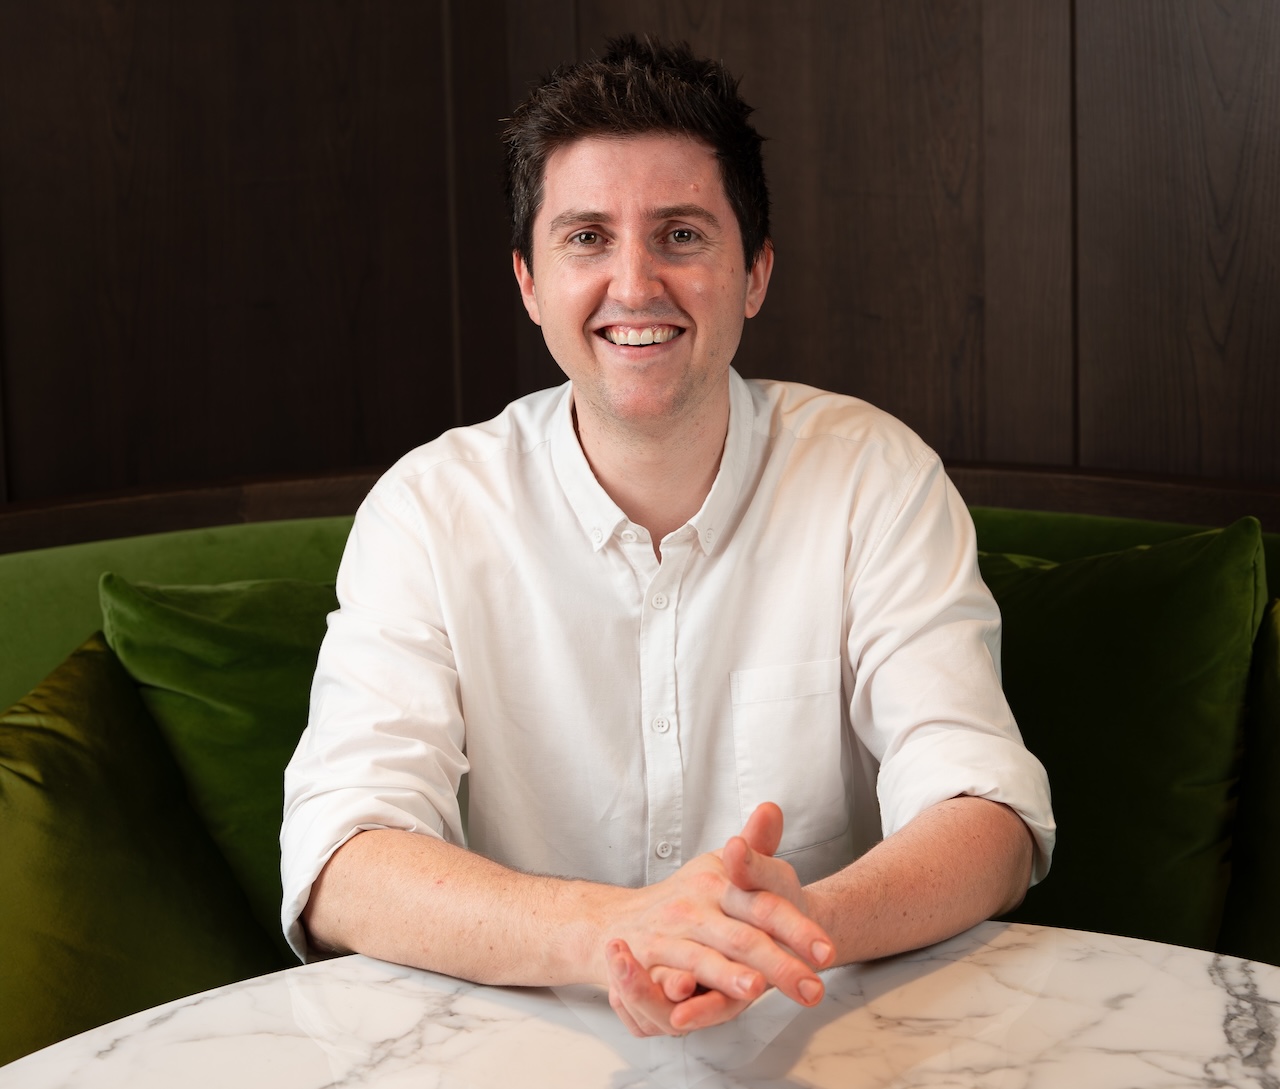 With five outlets in Sydney including flagship restaurant Saint Peter, chef Josh Niland has opened his first restaurant outside of Australia with the arrival of FYSH at the Singapore EDITION.